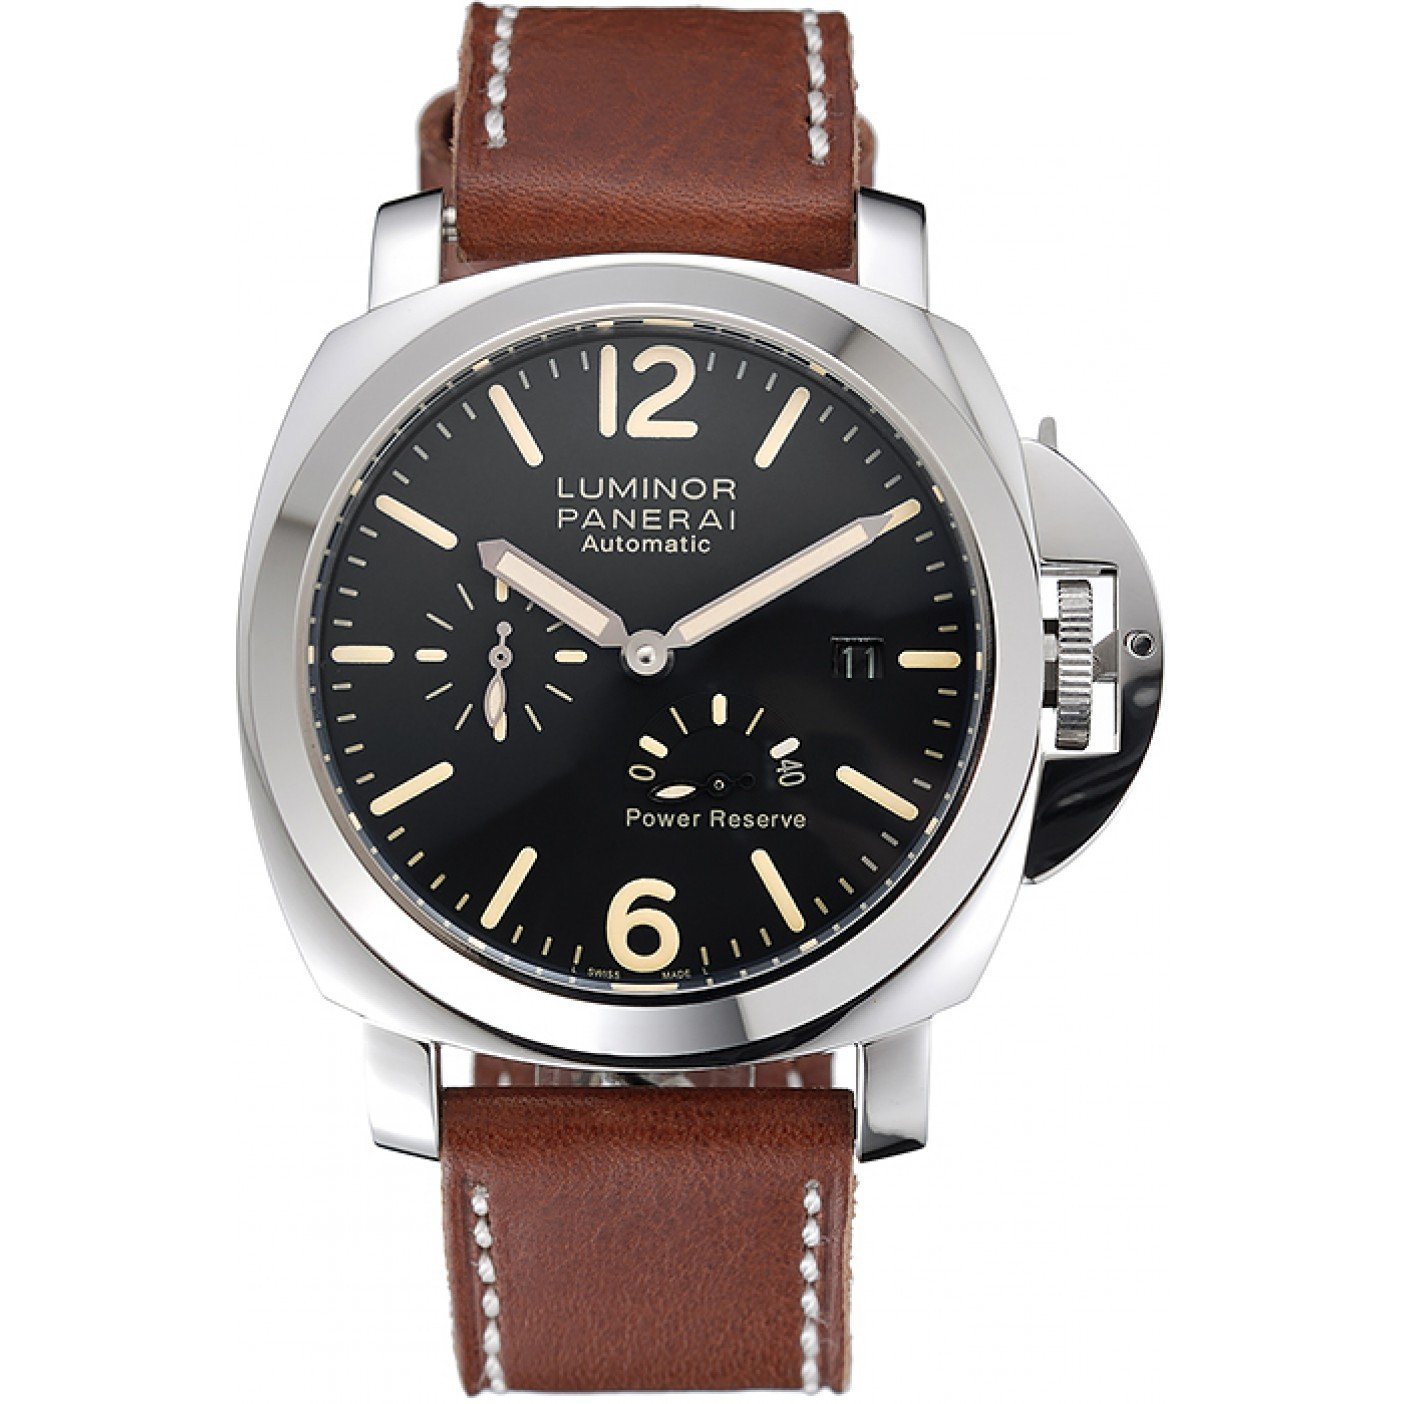 Panerai Luminor Automatic Power Reserve Black Dial Stainless Steel Case Brown Leather Strap